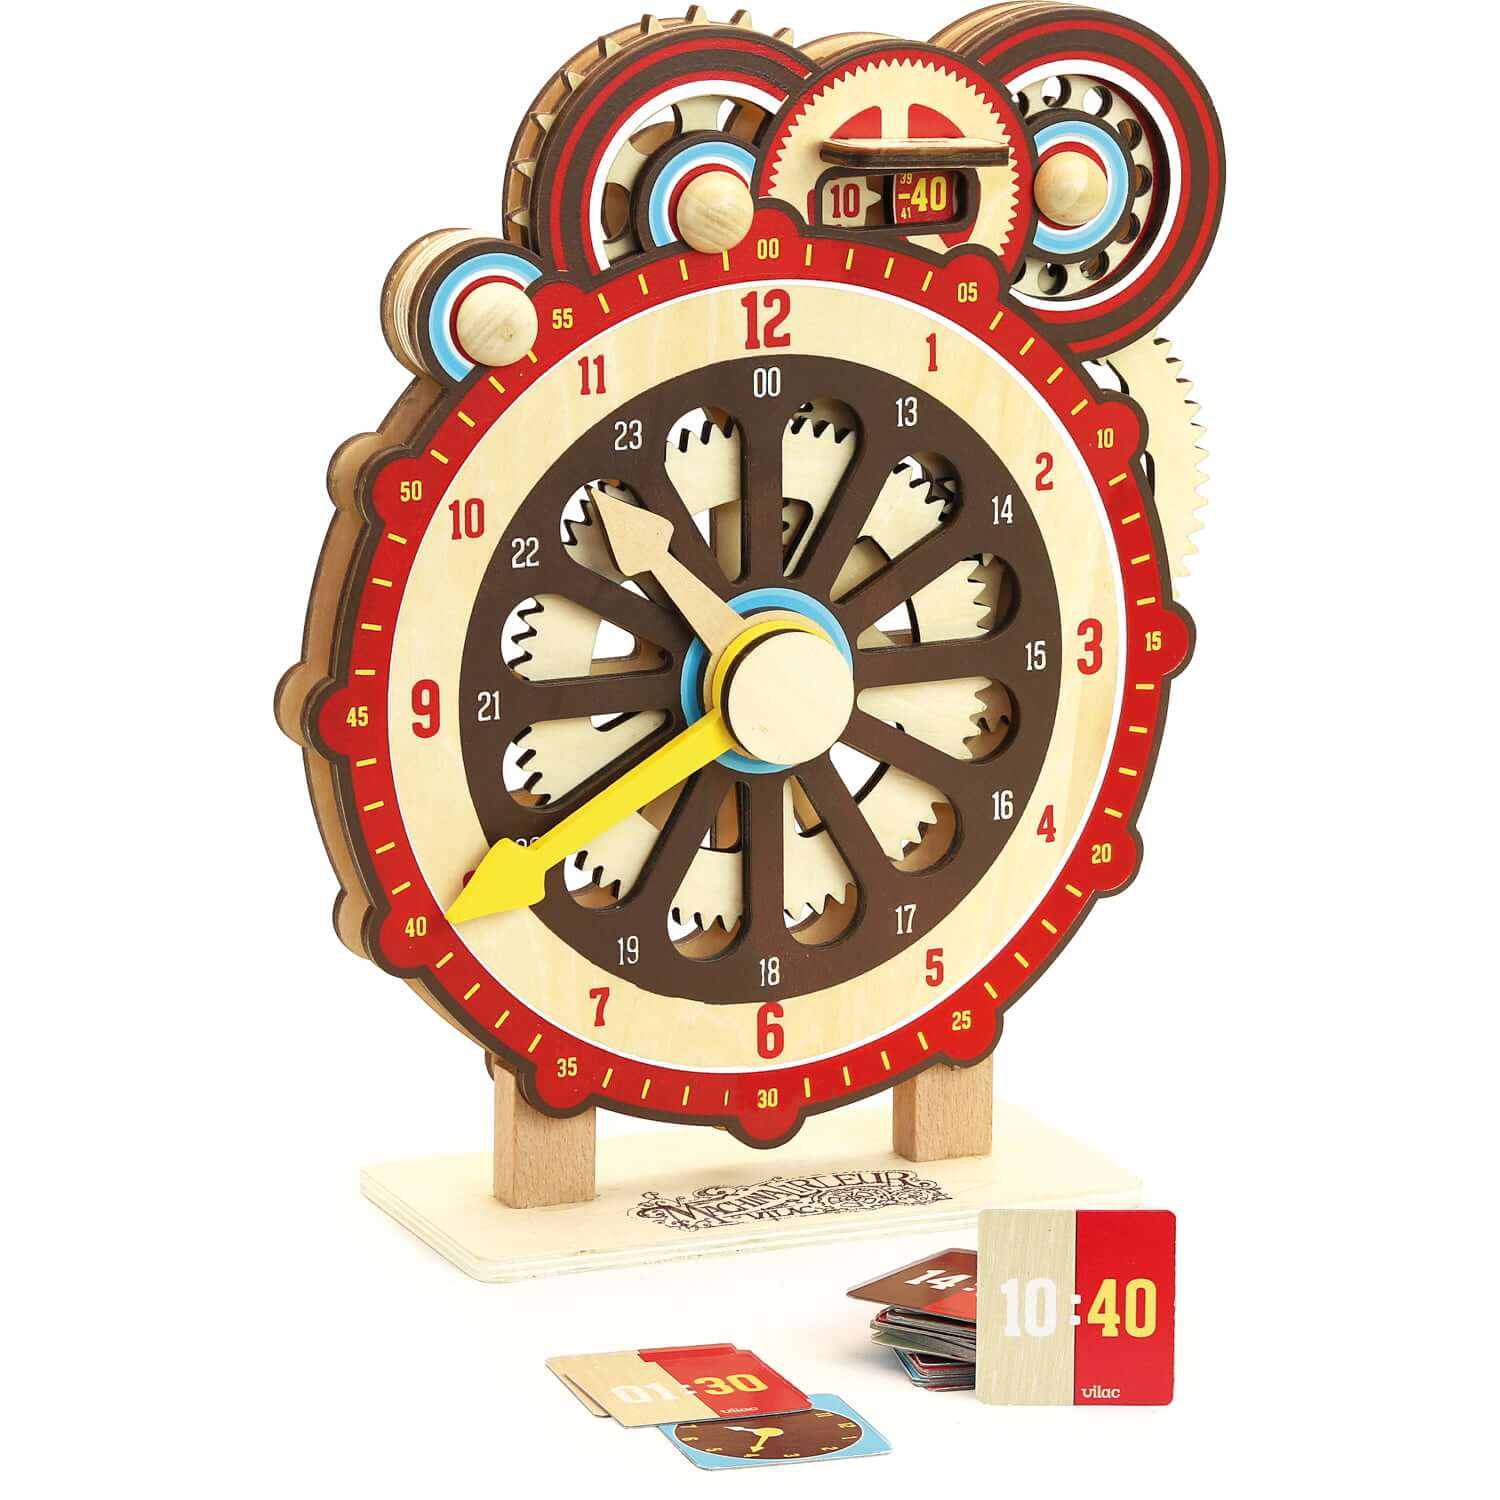 Explore time in a playful way with the Vilac Learning Clock. As your kiddo moves the minute hand, they'll see the digital dial respond – a fun learning experience that even comes with quiz cards to boost their knowledge. This clock isn't just about learning; it's also a nifty tool to enhance hand-eye coordination and dexterity in tiny hands.